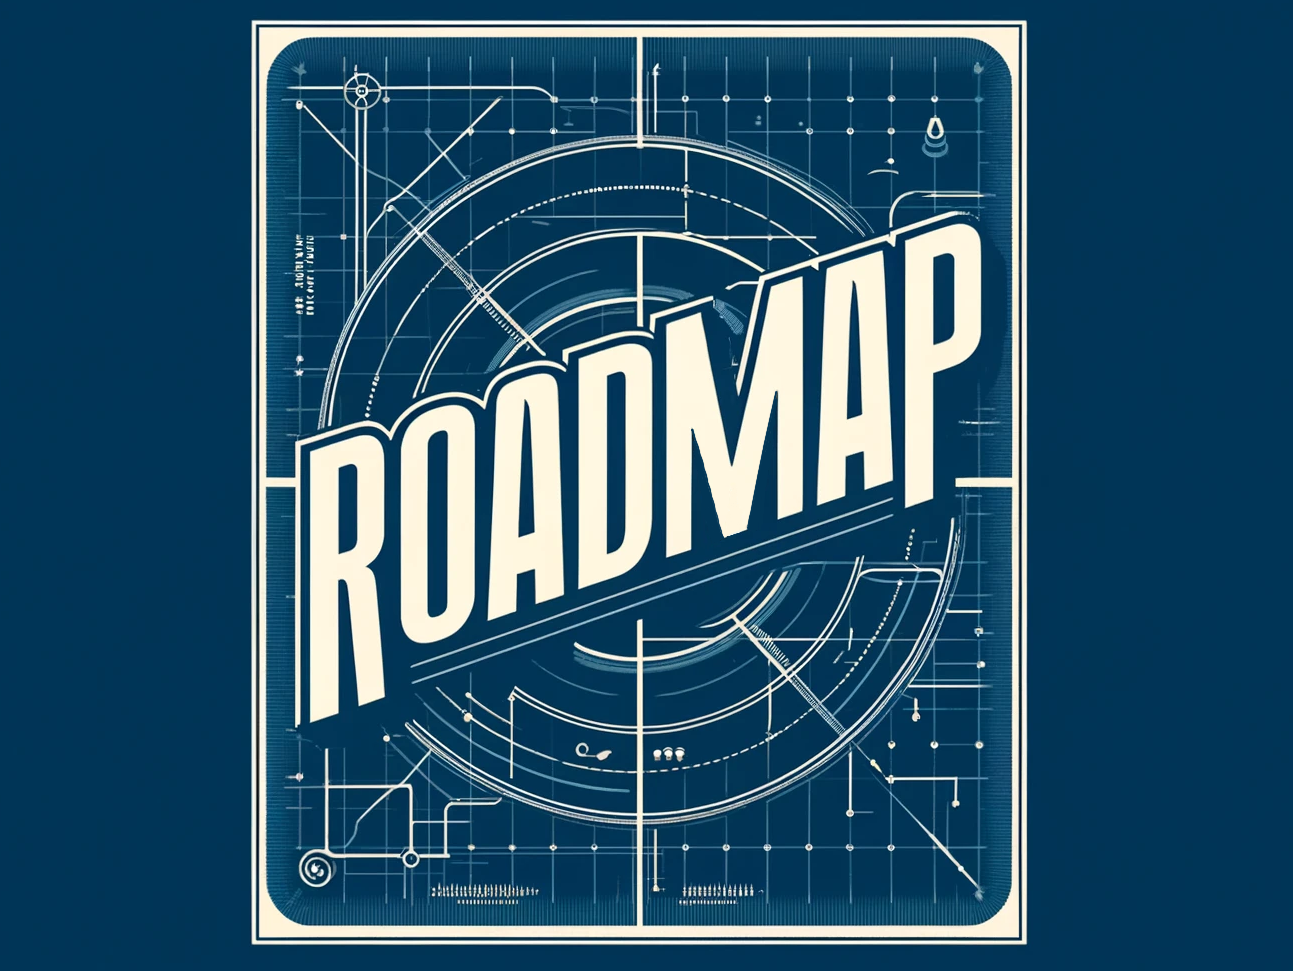 The Space Founding Roadmap